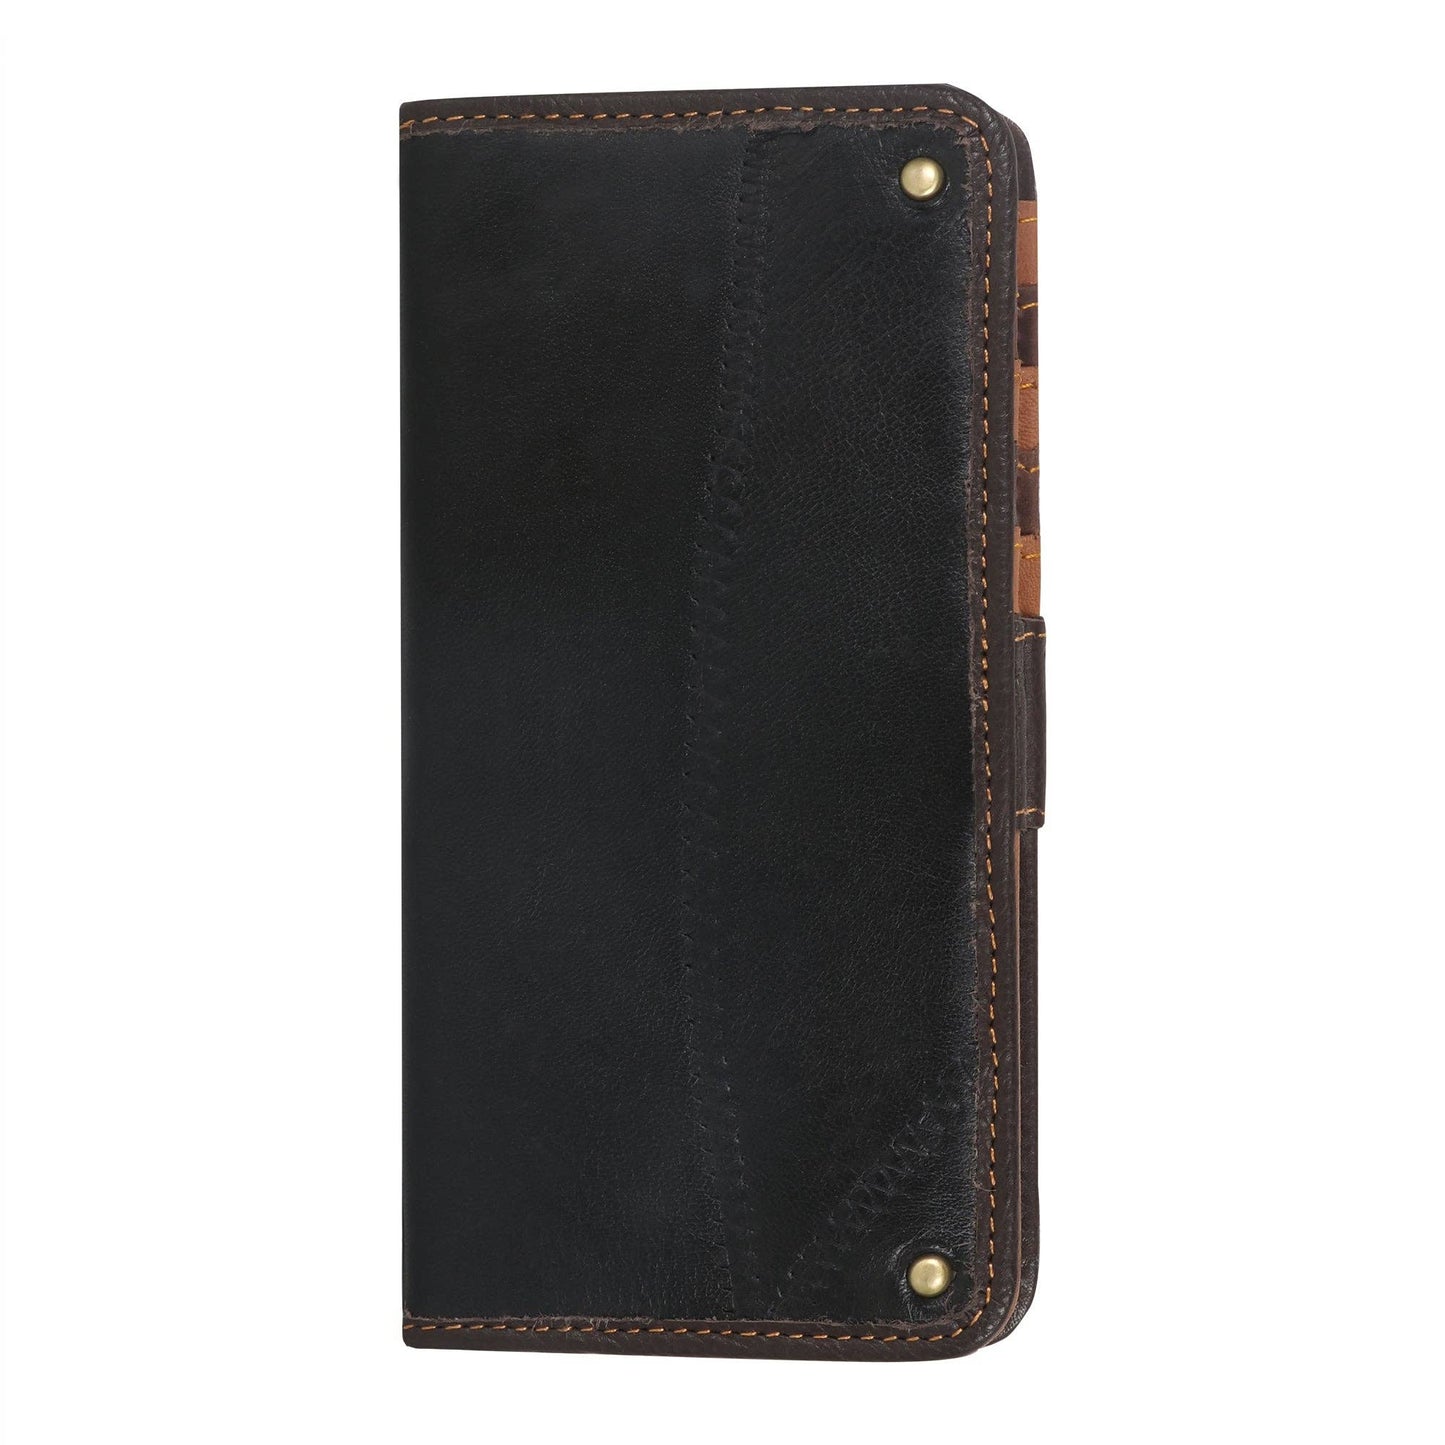 Vaan & Co. Spencer Grey and Black Bifold Wallet-Front